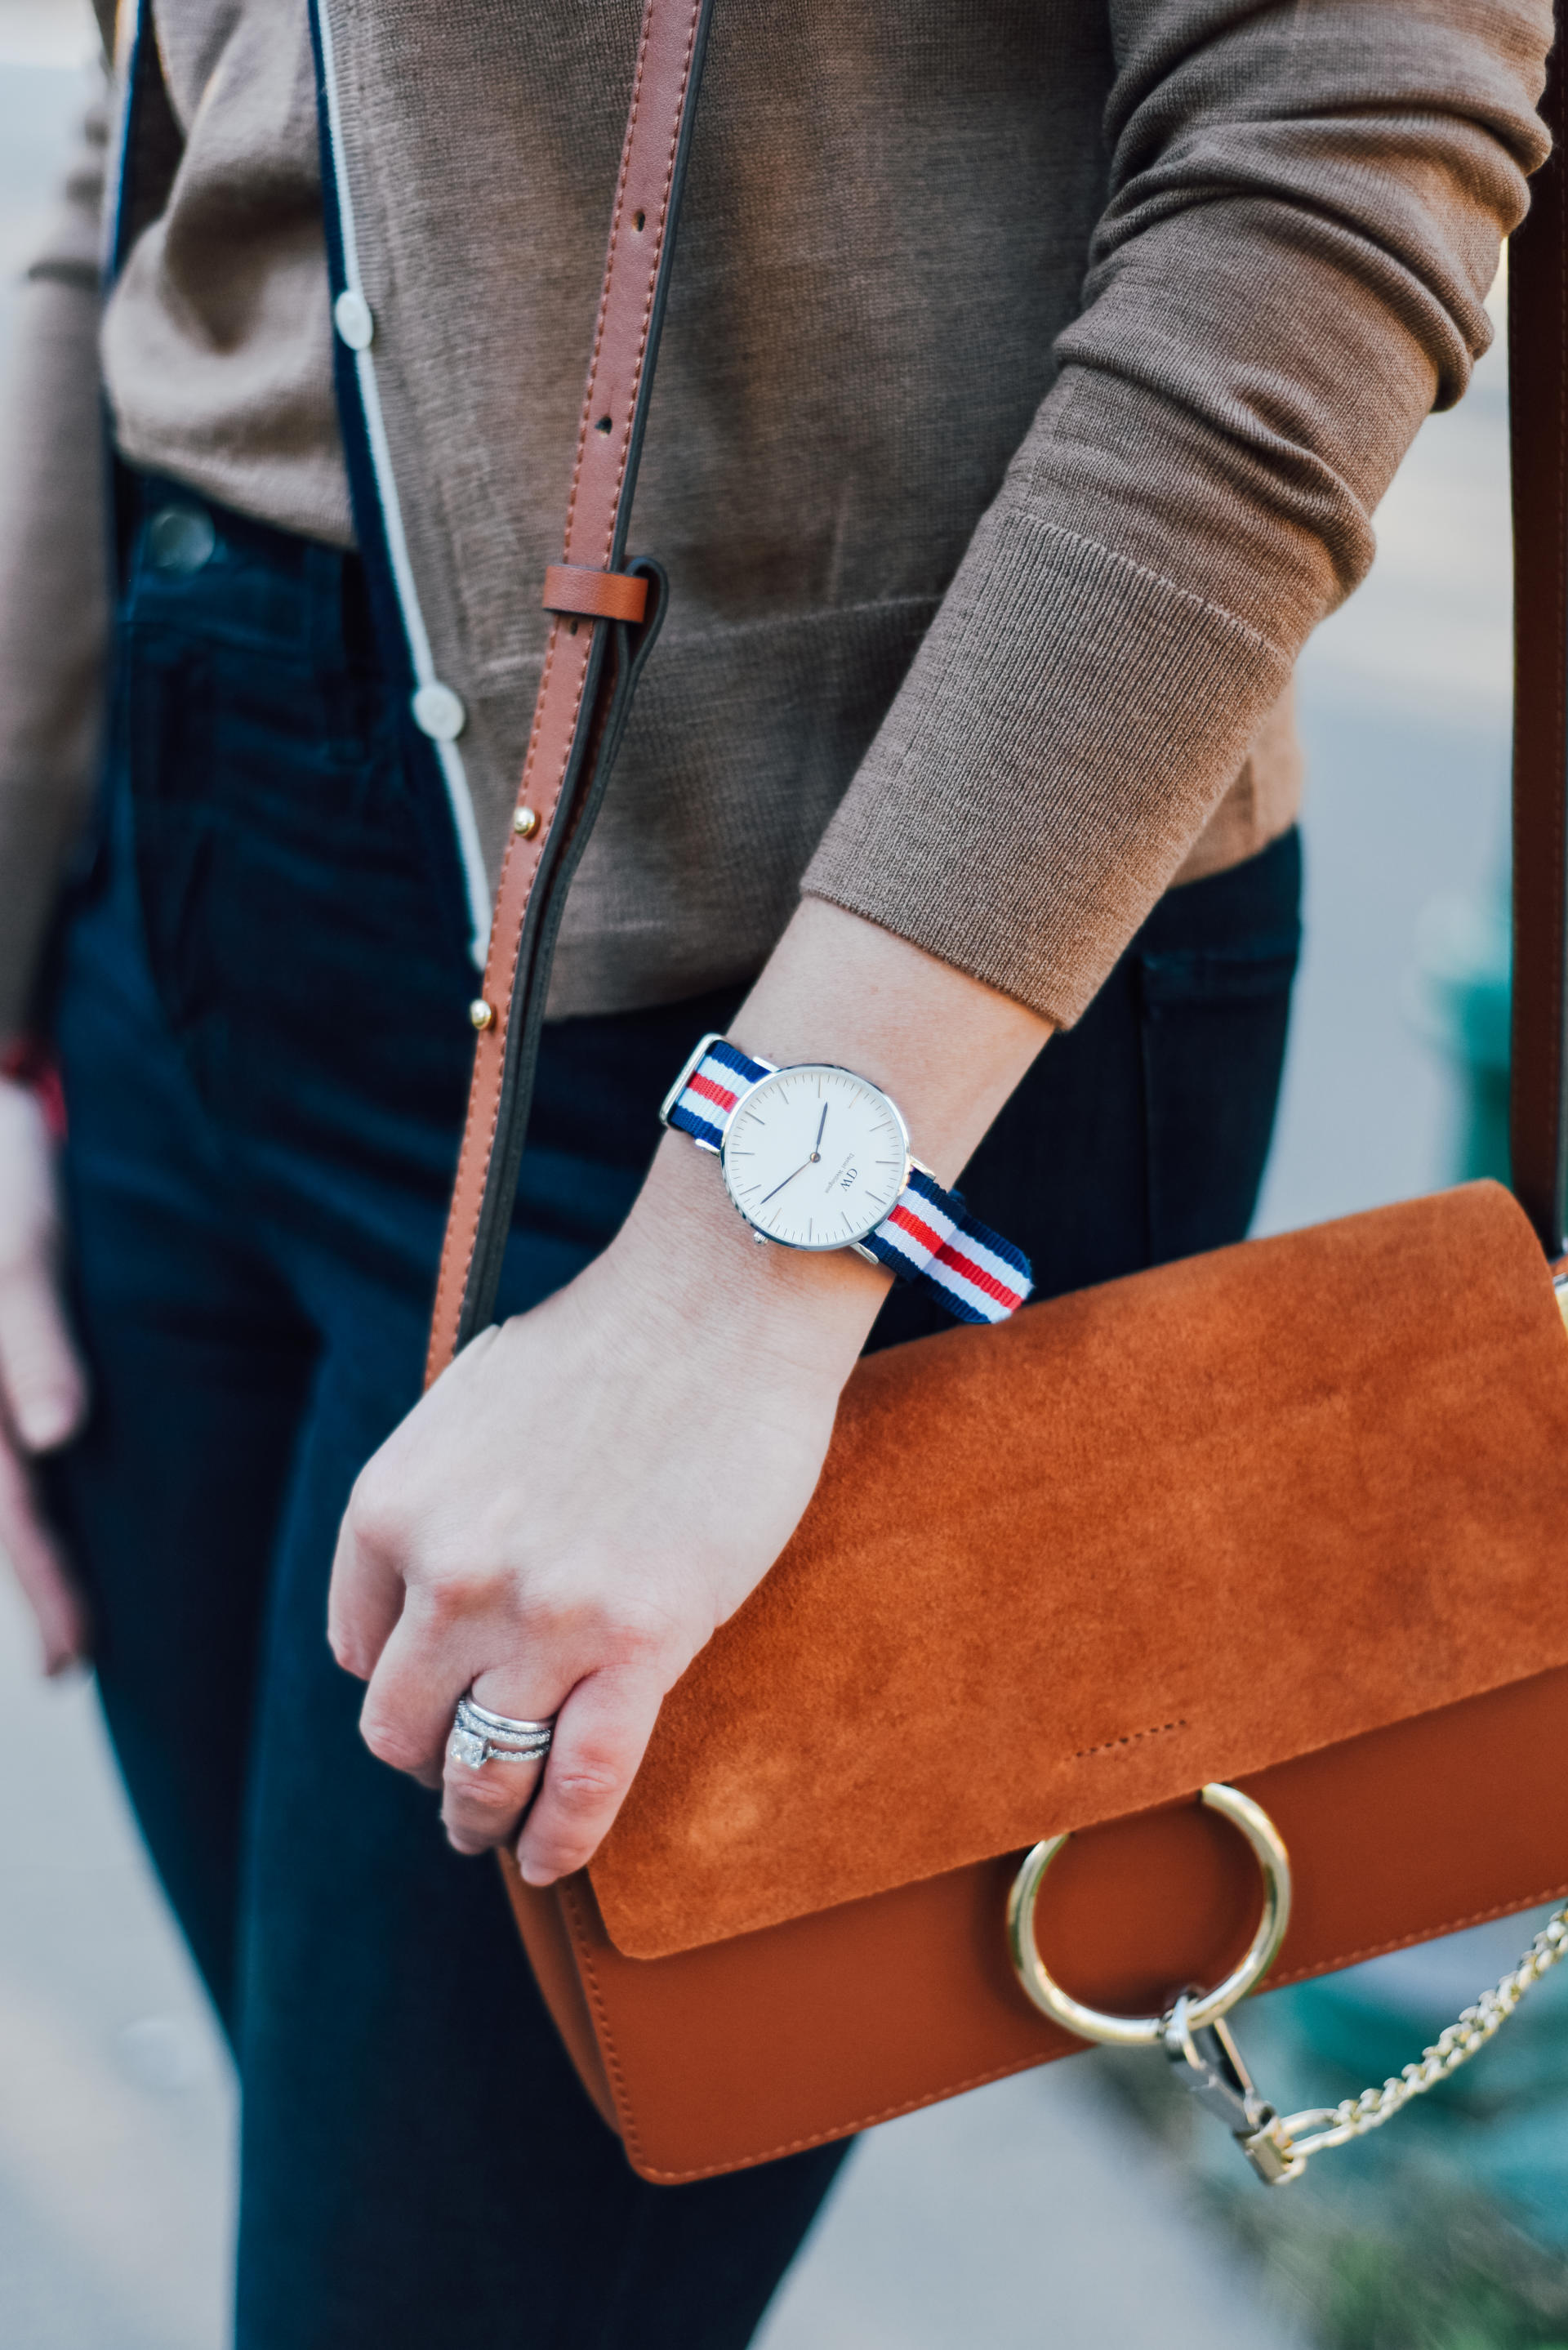 STYLE: Thankful with Daniel Wellington - Daniel Wellington Promo Code by popular New Jersey style blogger What's For Dinner Esq.